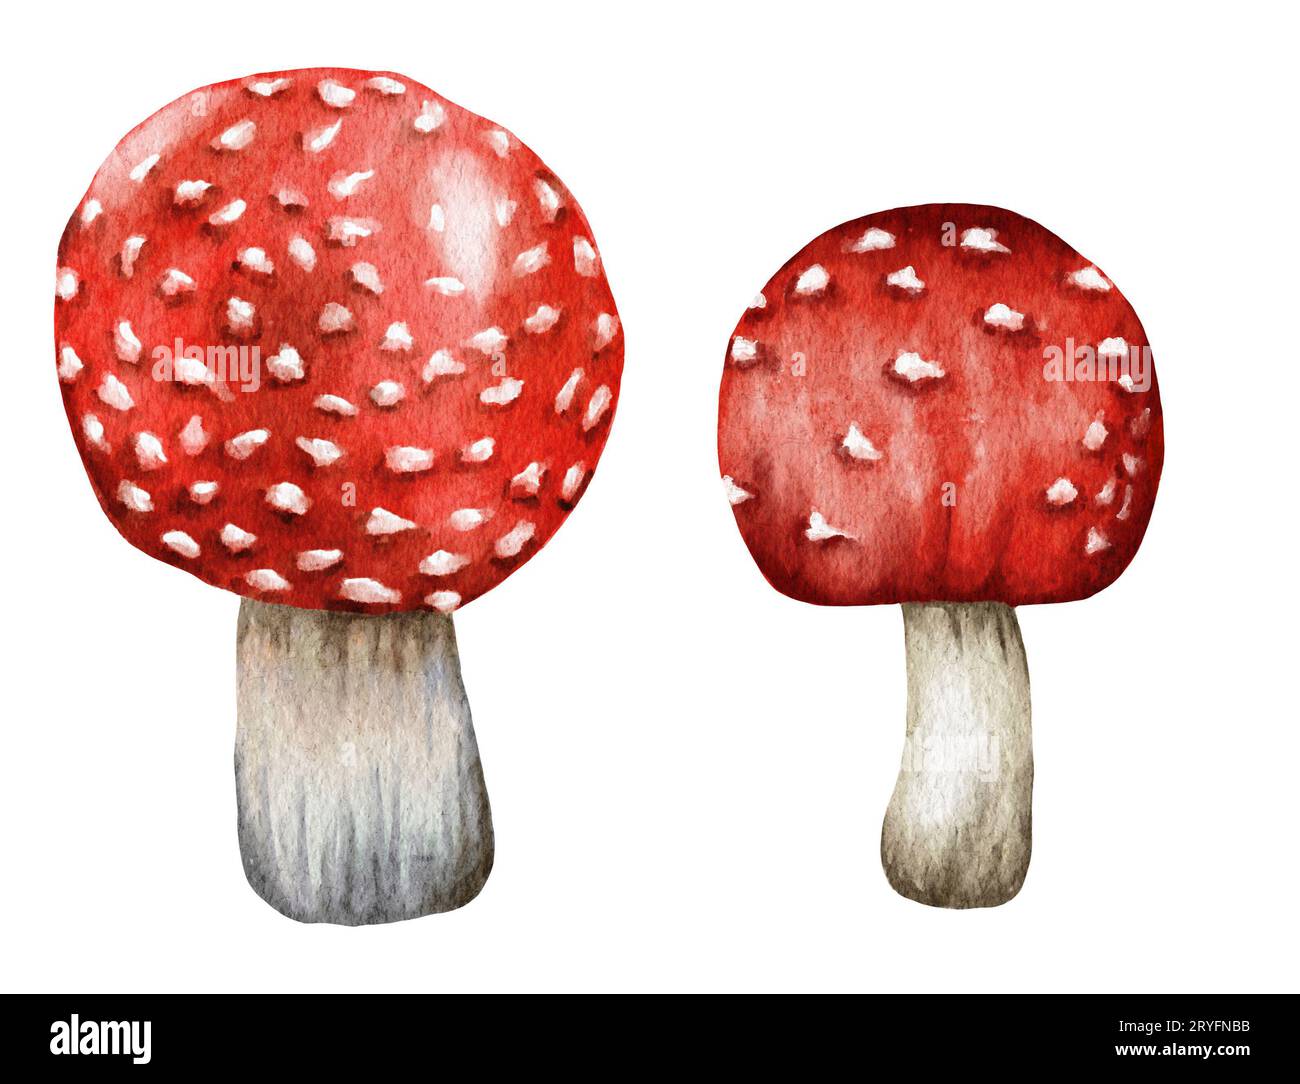 Watercolor dangerous poisonous mushrooms red Amanita muscaria wild fungus fungi from autumn fall forest woodland natural season Stock Photo